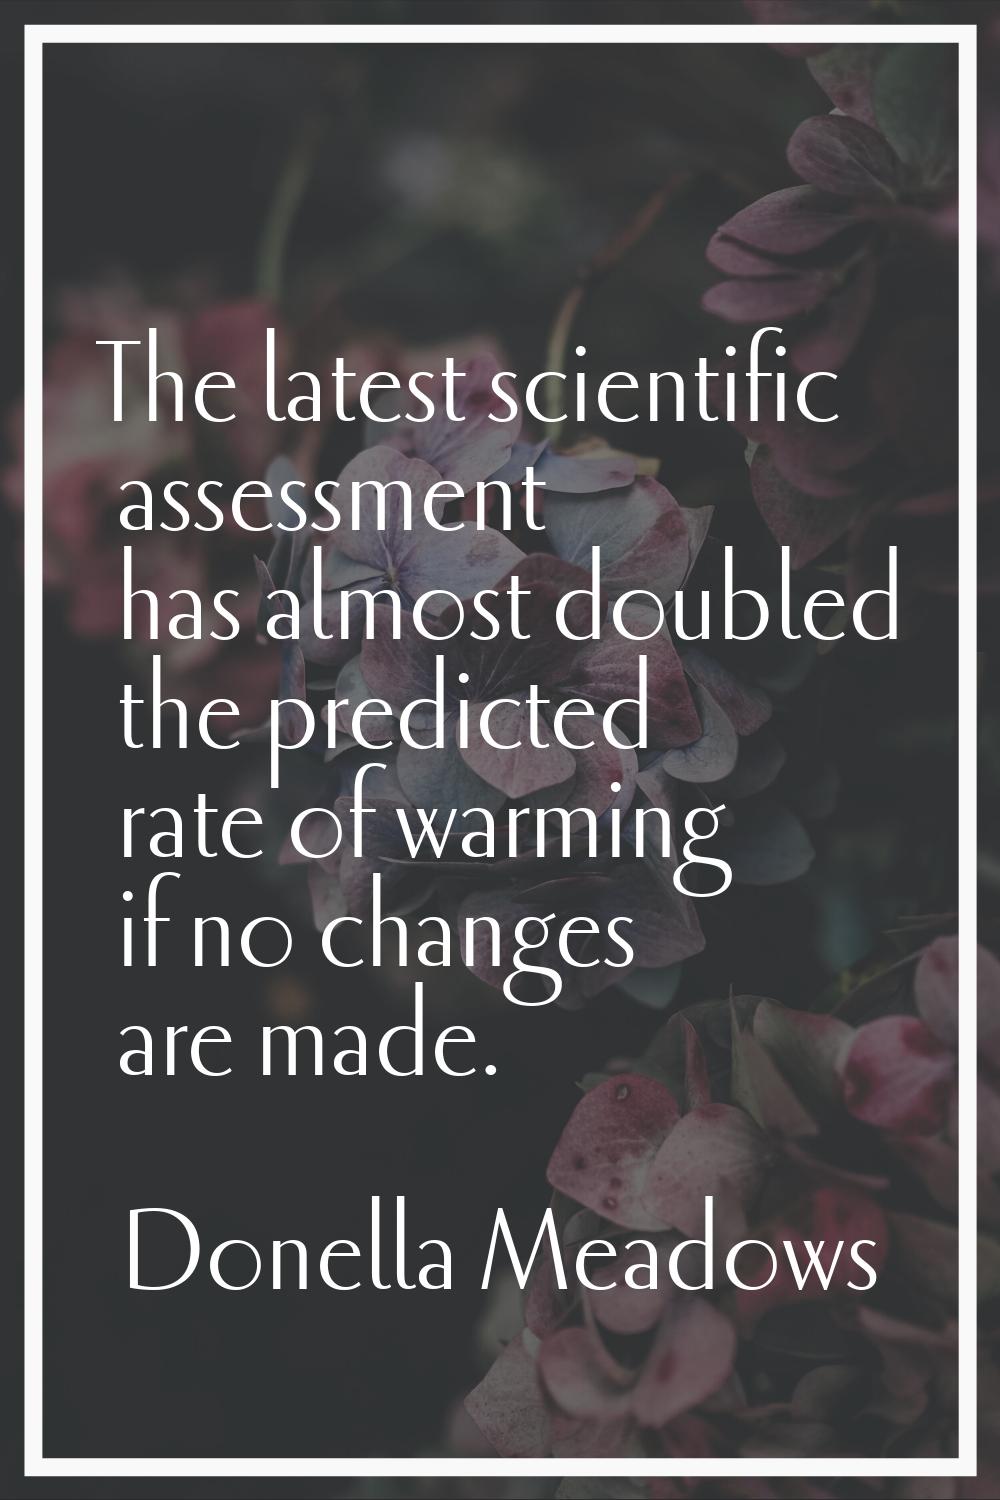 The latest scientific assessment has almost doubled the predicted rate of warming if no changes are